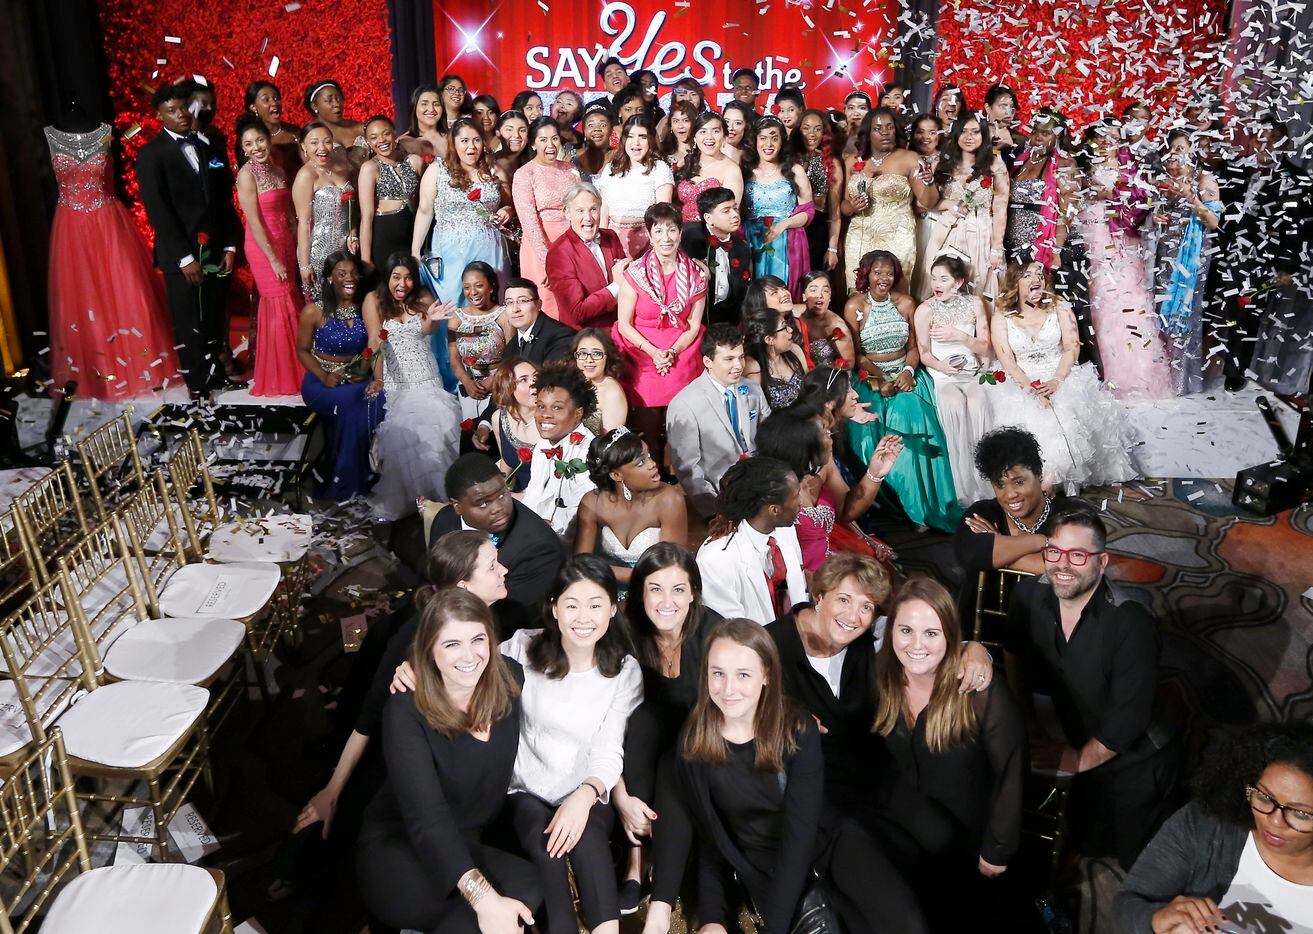 DALLAS, TX - APRIL 18: Say Yes to the Prom at the Westin Hotel on Monday, April 18, 2016 in...